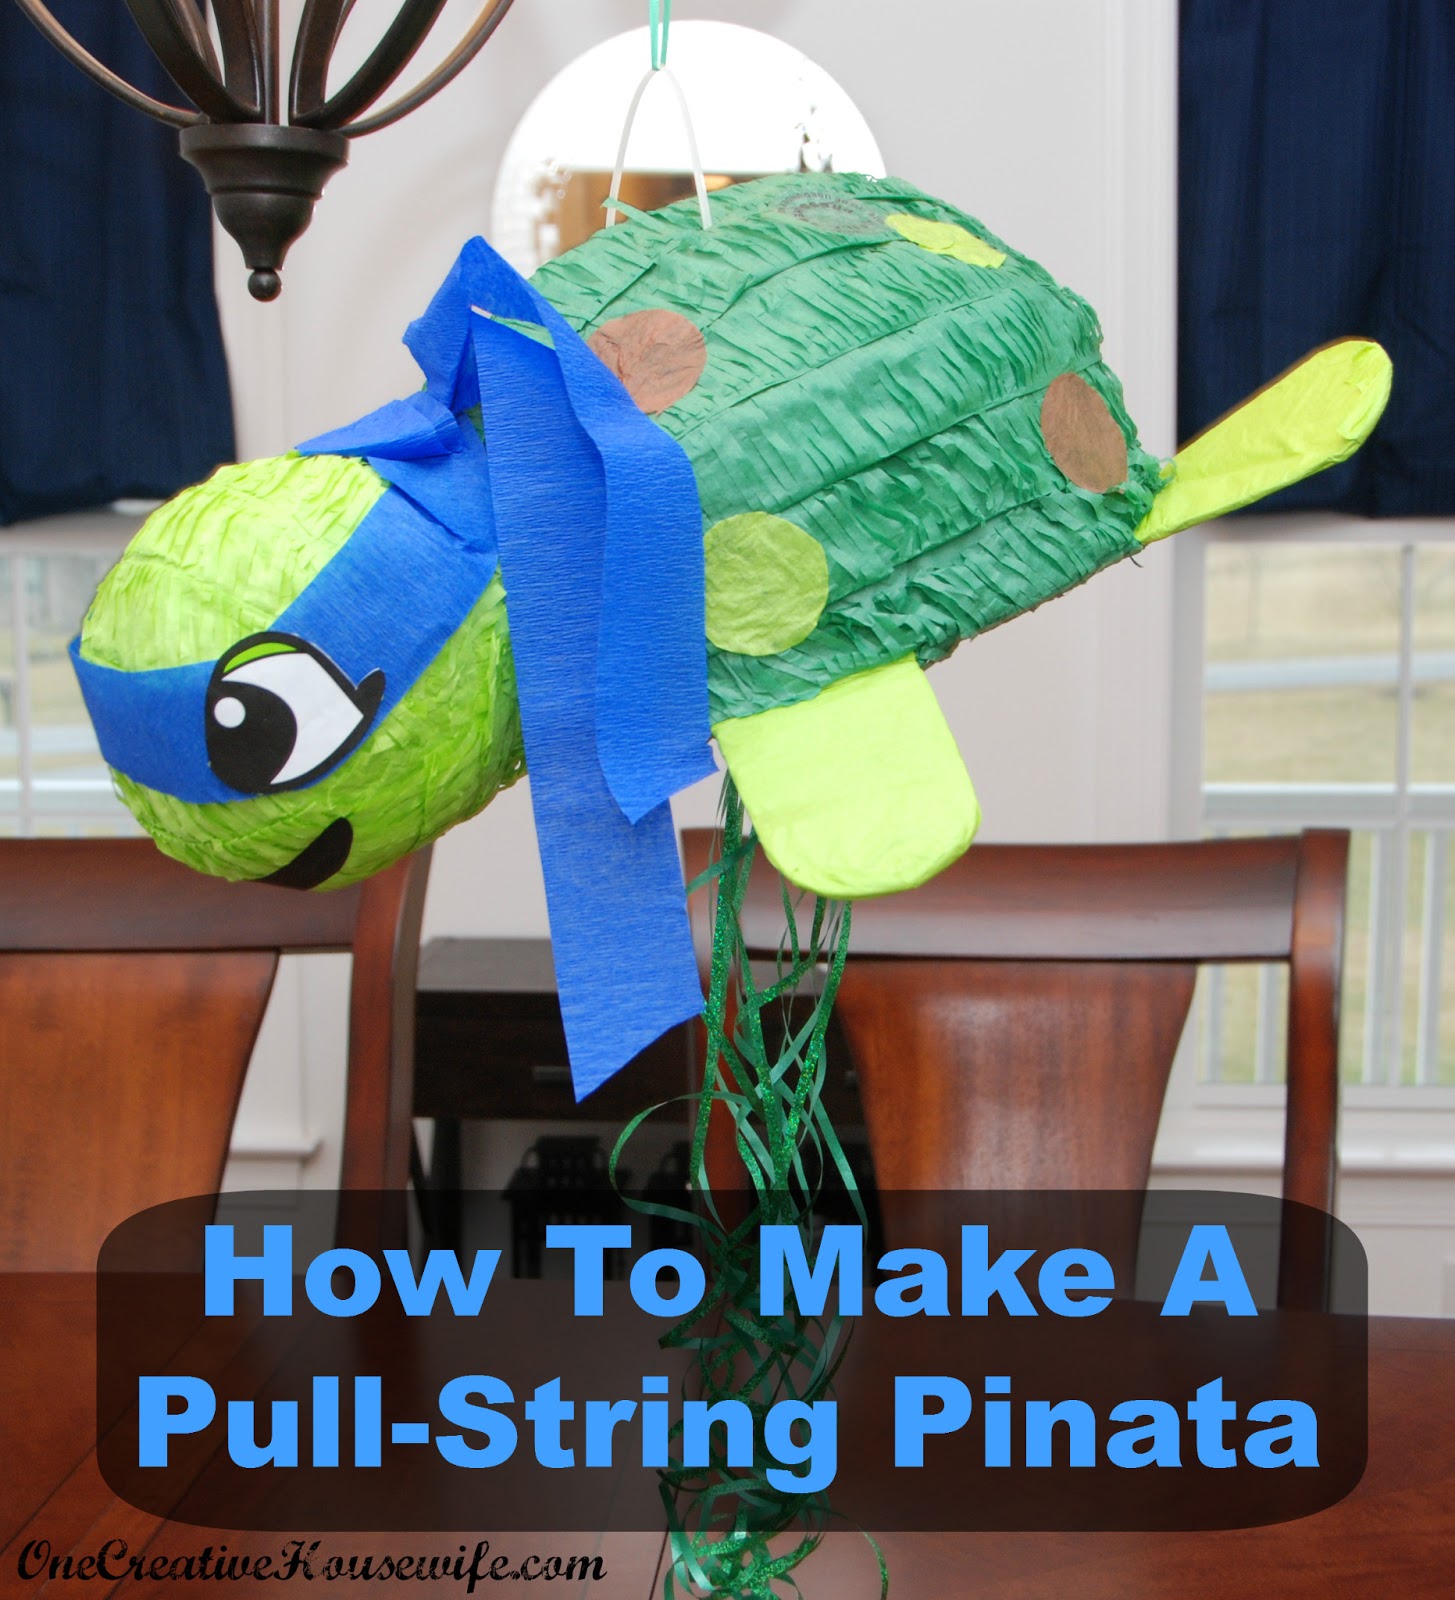 One Creative Housewife: How To Make A Pull-String Pinata From A